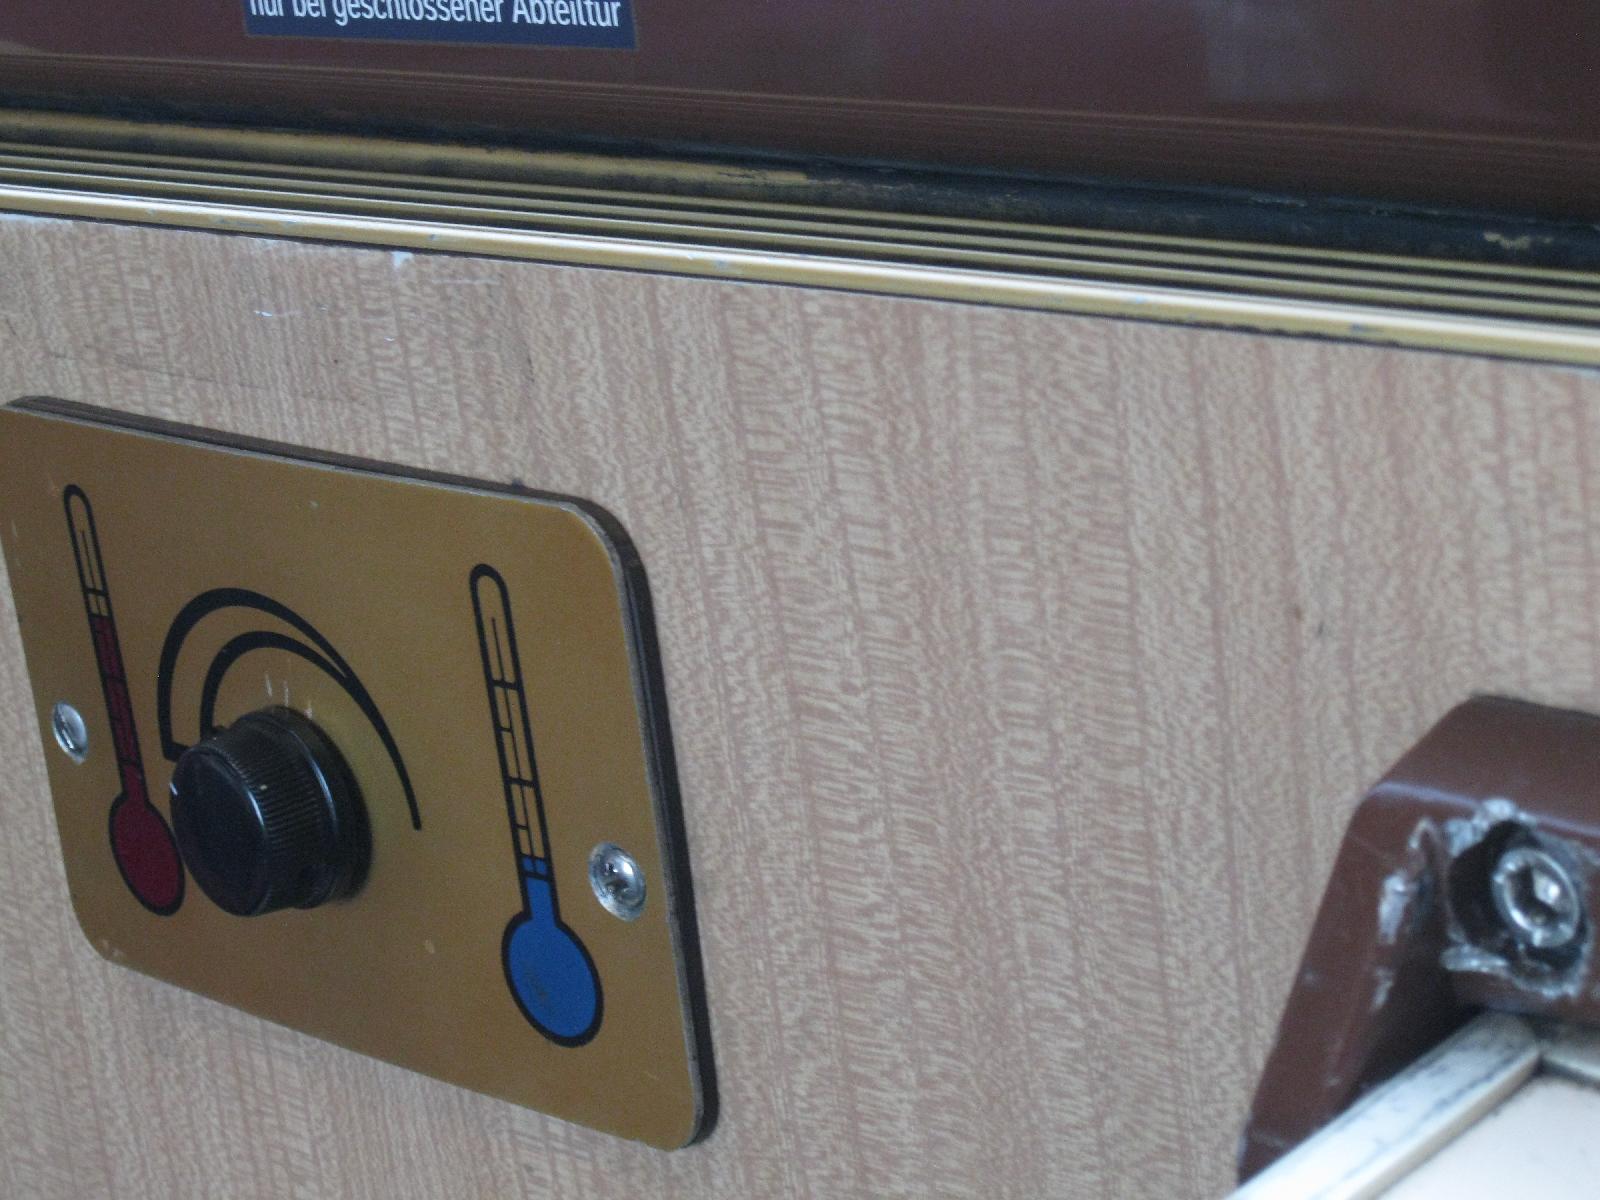 Themostat for our compartment.  The knob would not turn.